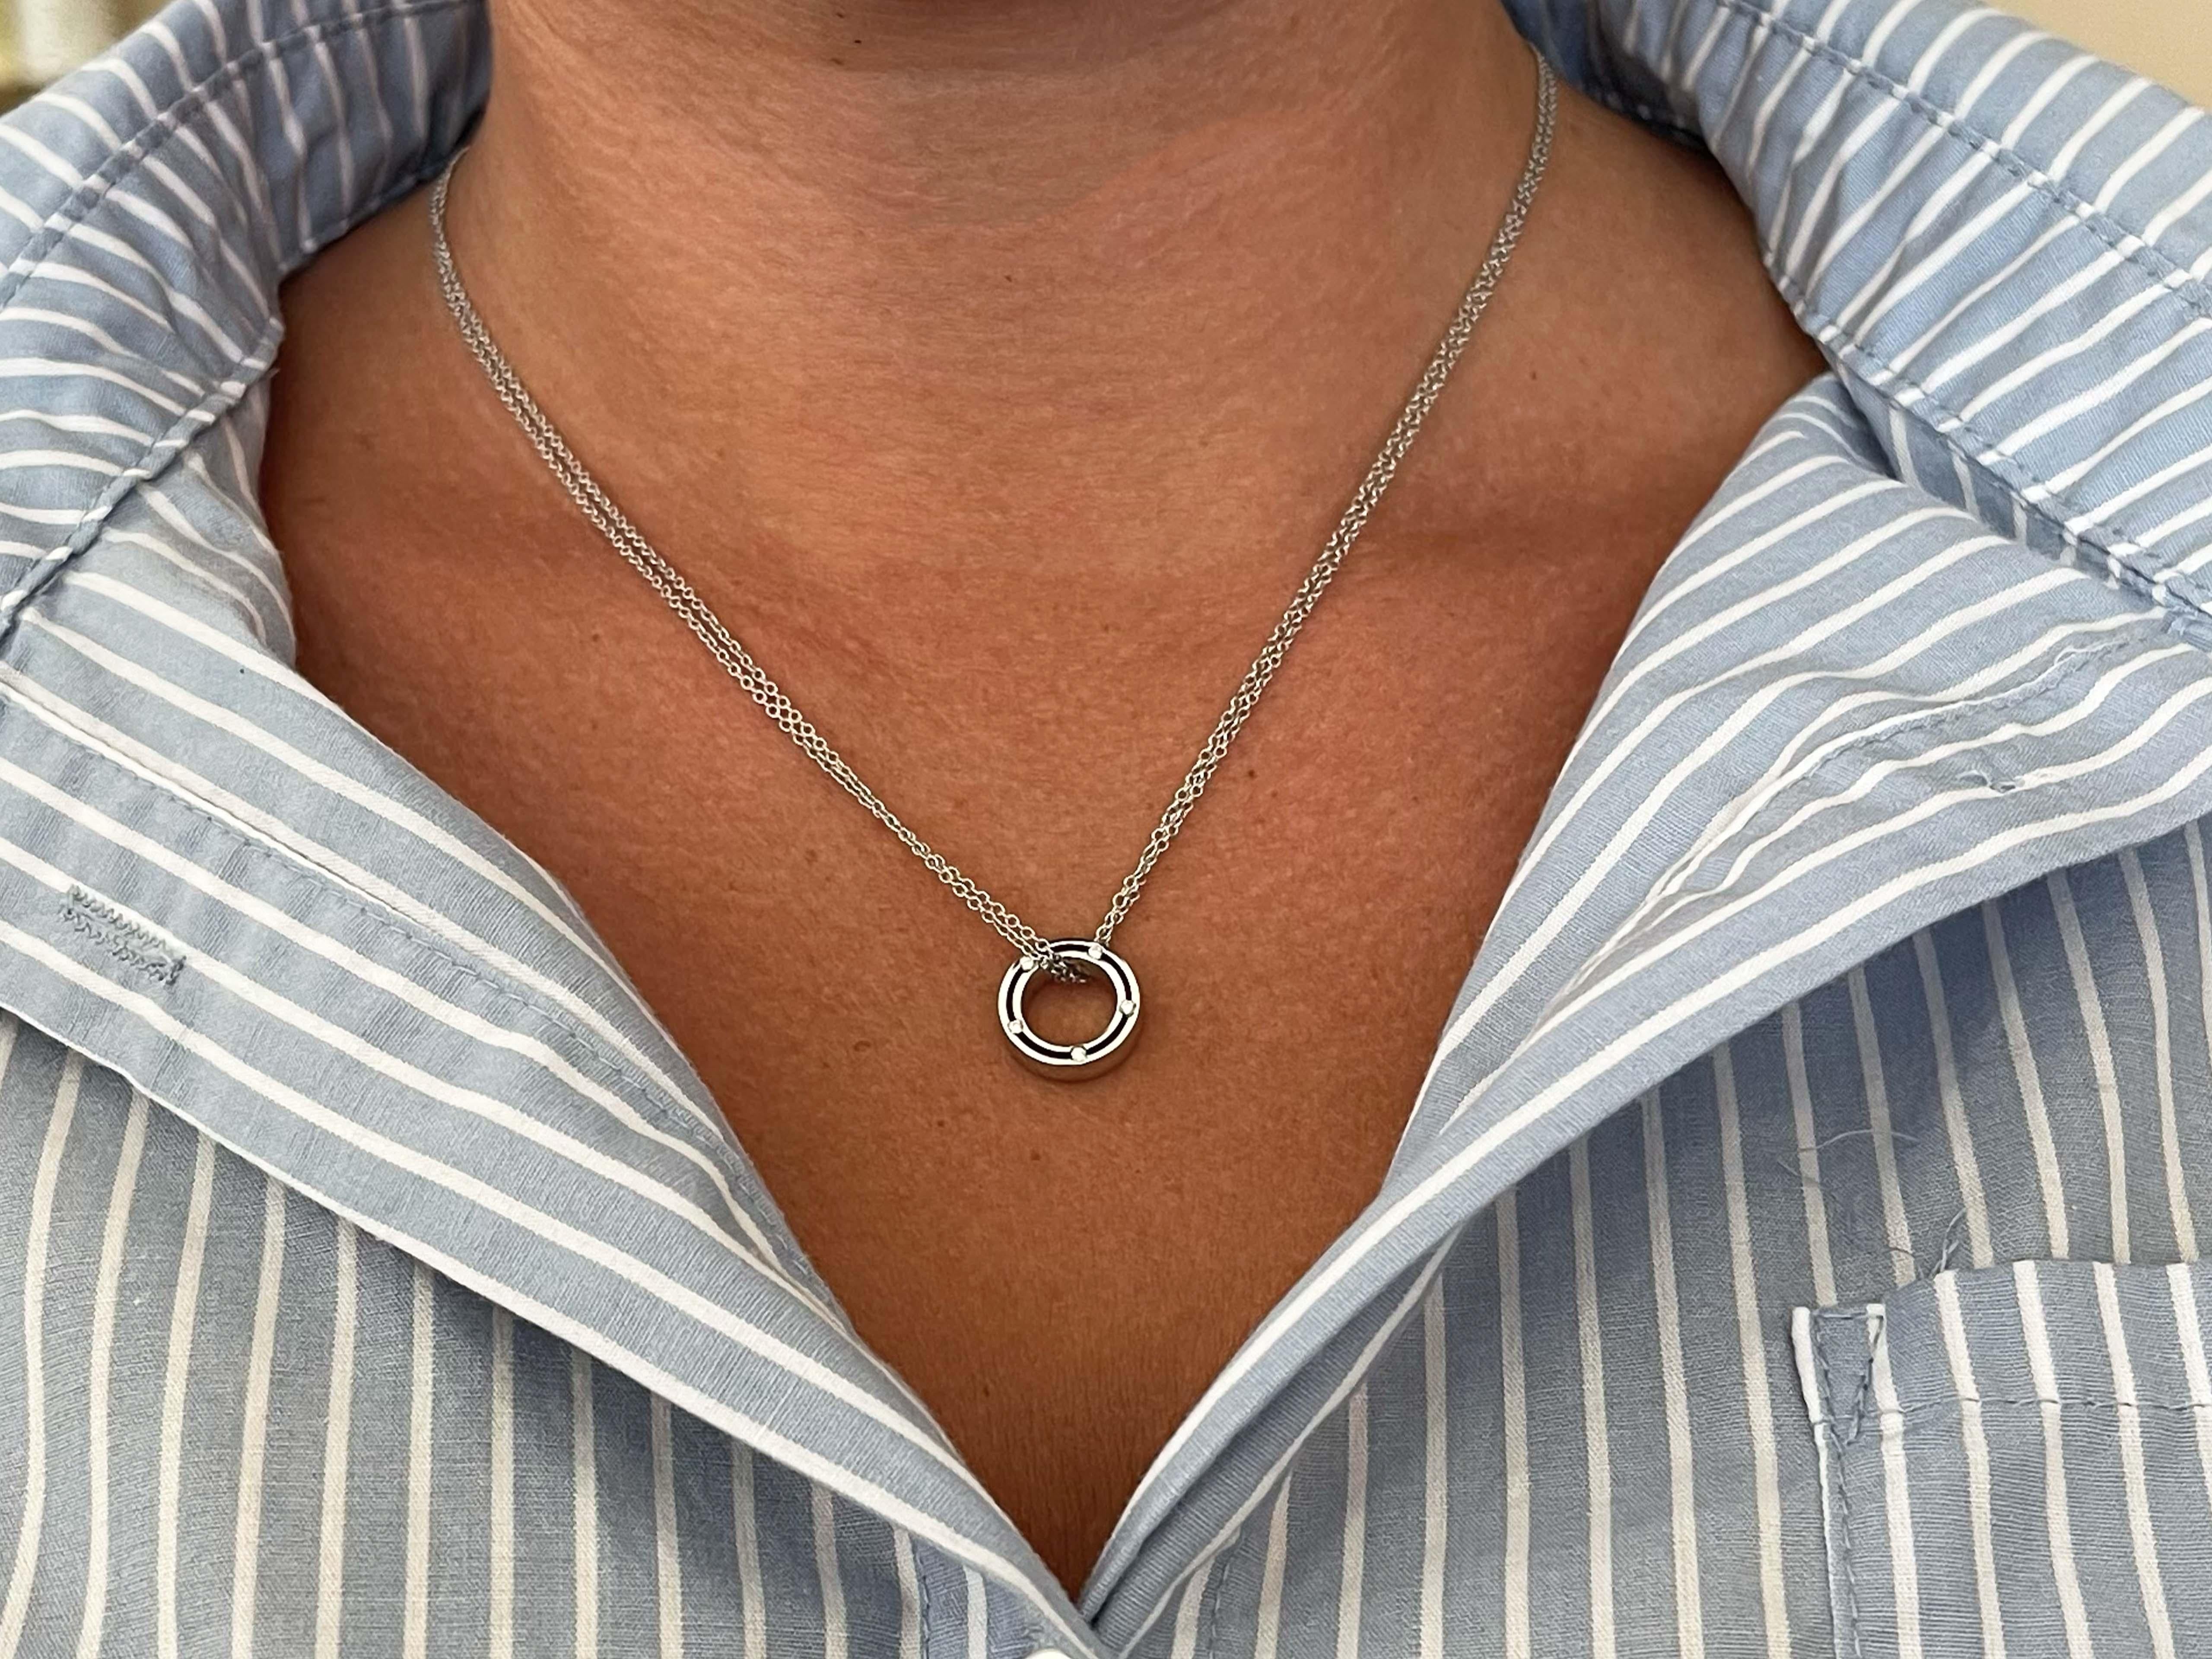 Damiani and Brad Pitt Designed 18K White Gold and Diamond Circle Necklace. A contemporary 14K white gold and diamond circle necklace co-designed by Damiani and Brad Pitt. A delicate double cable link chain suspends a circle pendant having five